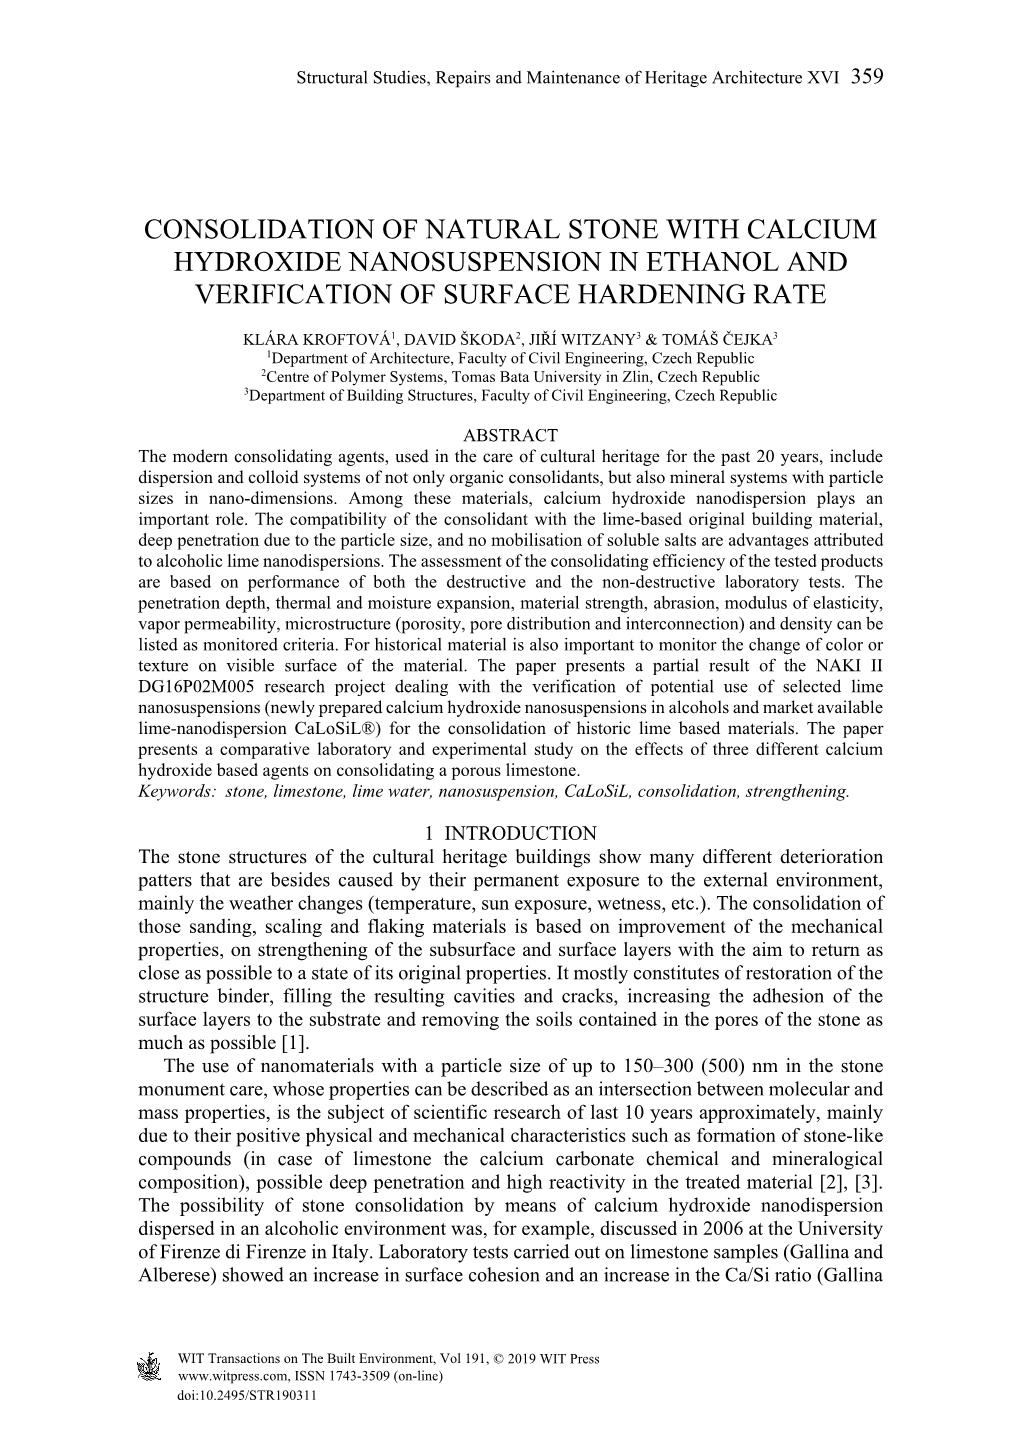 Consolidation of Natural Stone with Calcium Hydroxide Nanosuspension in Ethanol and Verification of Surface Hardening Rate